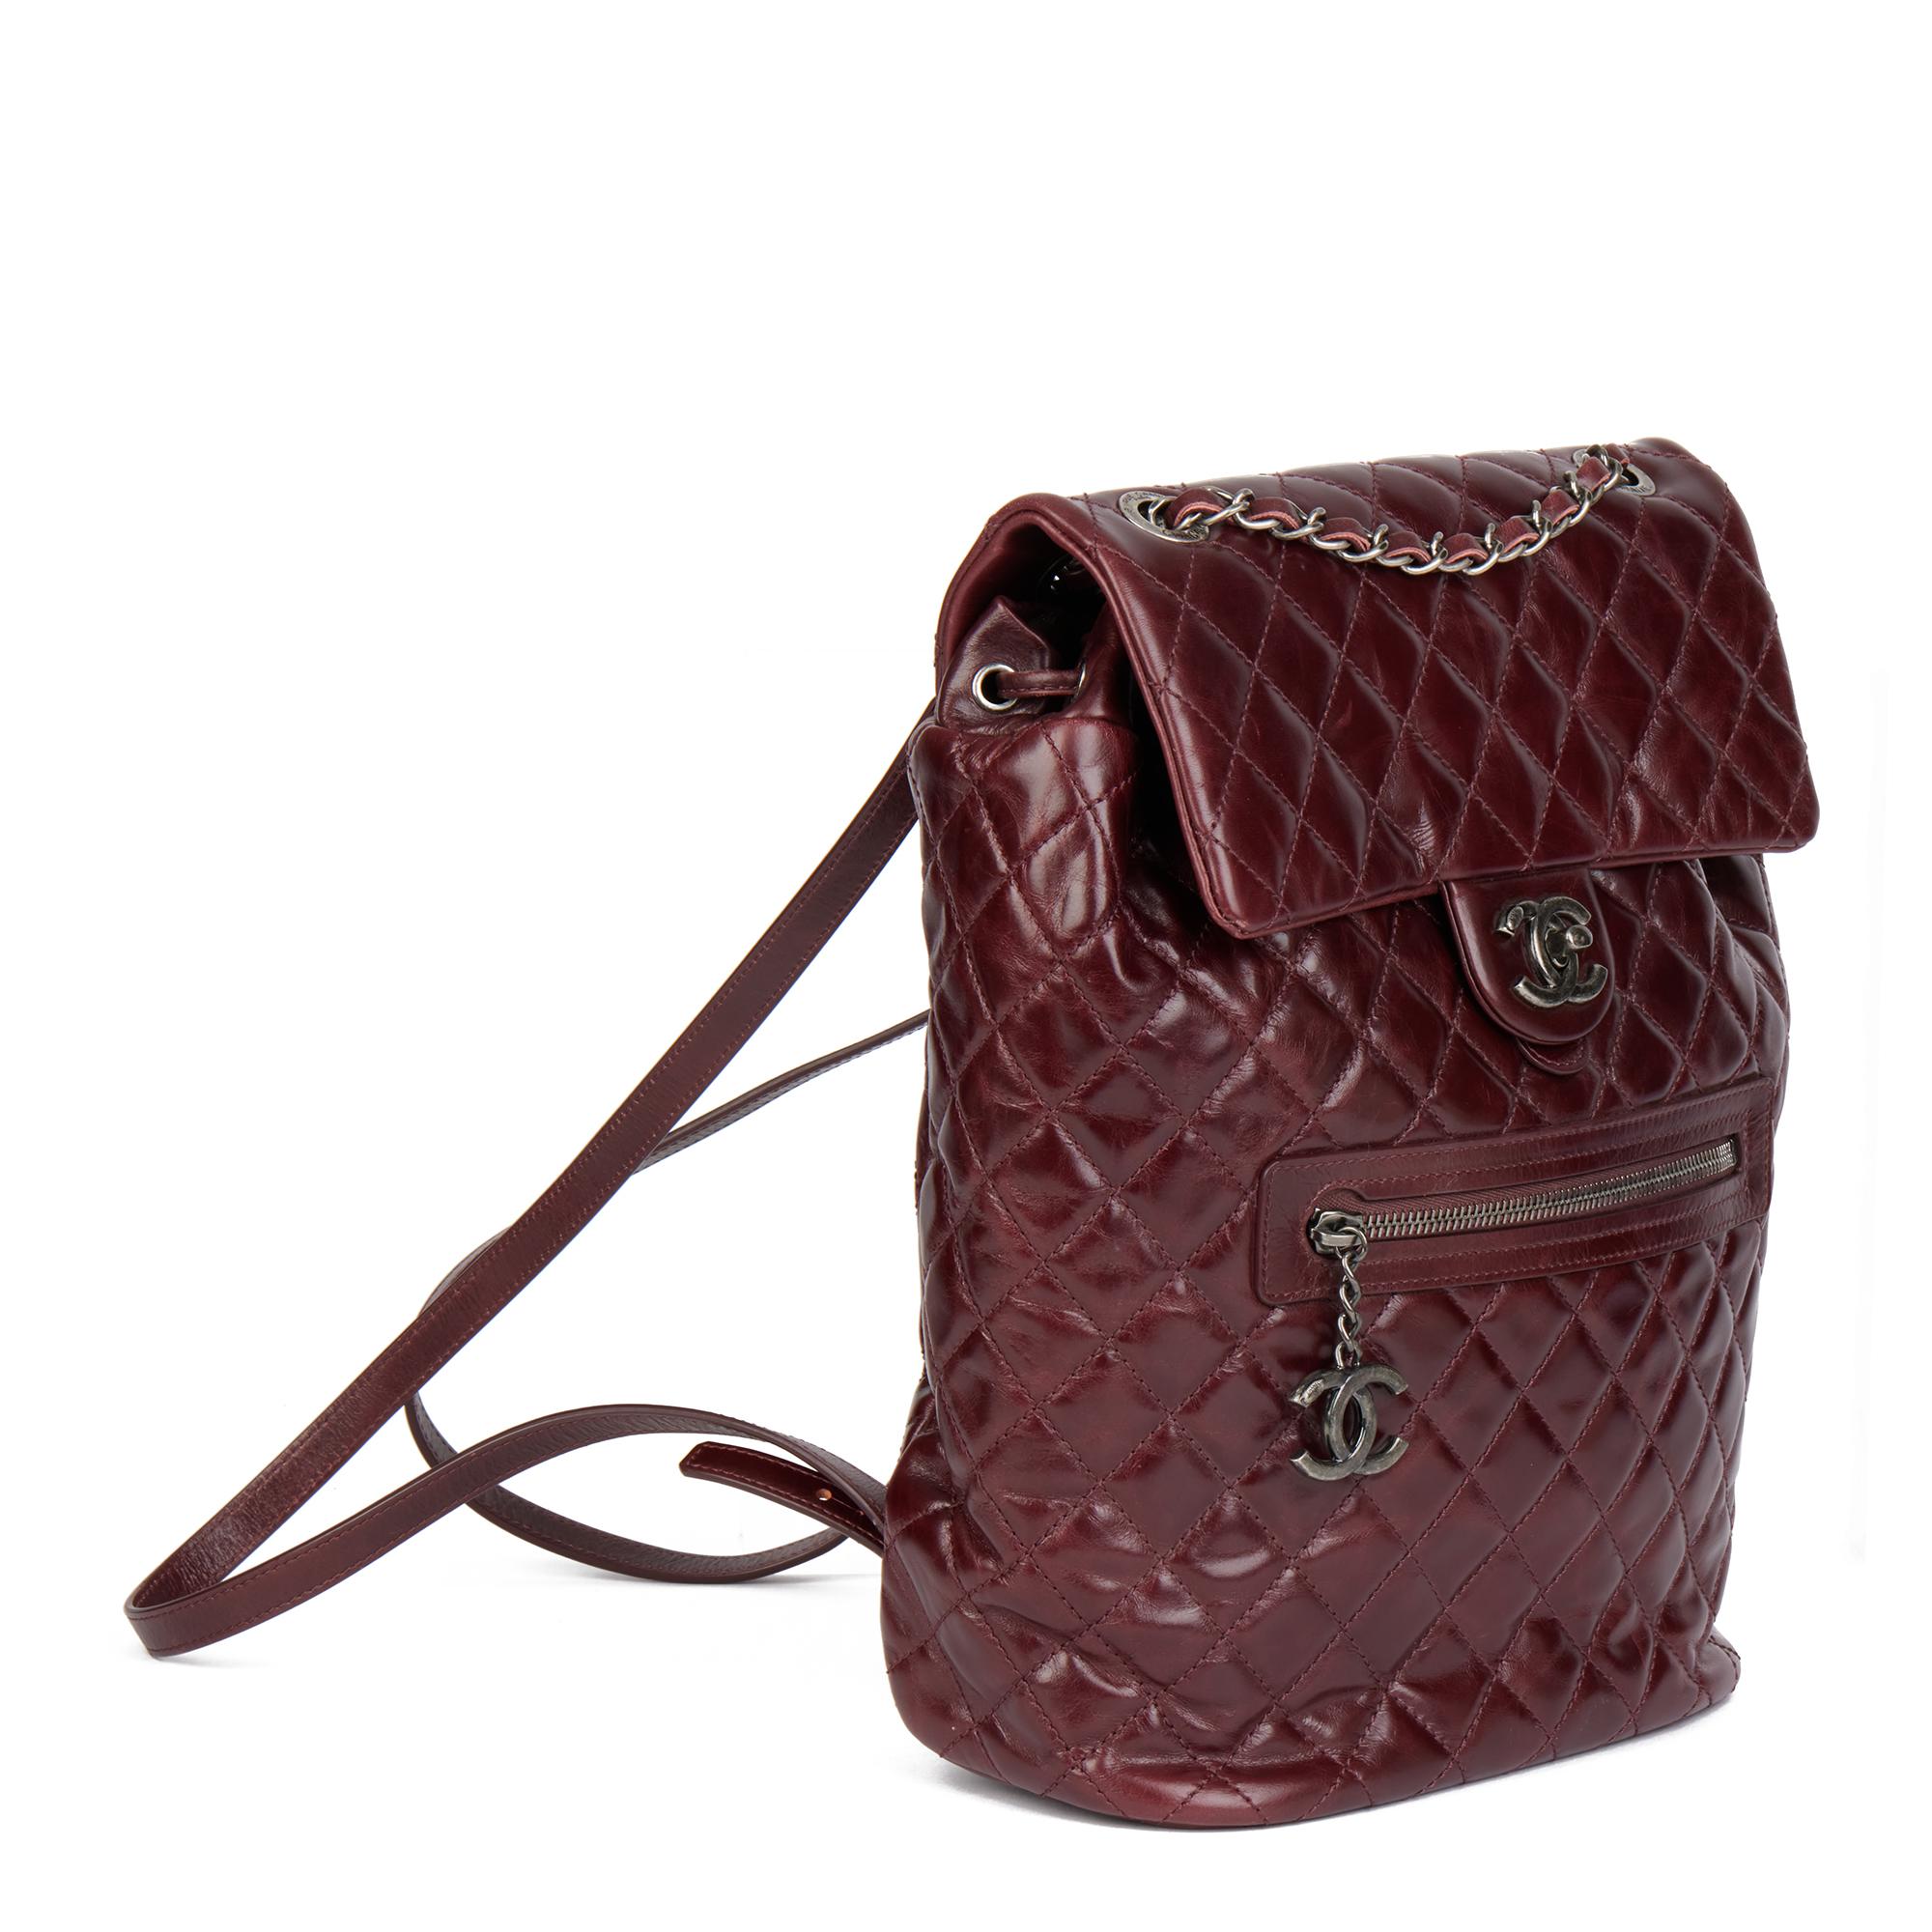 CHANEL
Burgundy Calfskin Leather Small Mountain Backpack

Serial Number: 21114493
Age (Circa): 2015
Authenticity Details: Serial Sticker (Made in Italy)
Gender: Ladies
Type: Backpack

Colour: Burgundy
Hardware: Antiqued Silver
Material(s): Calfskin